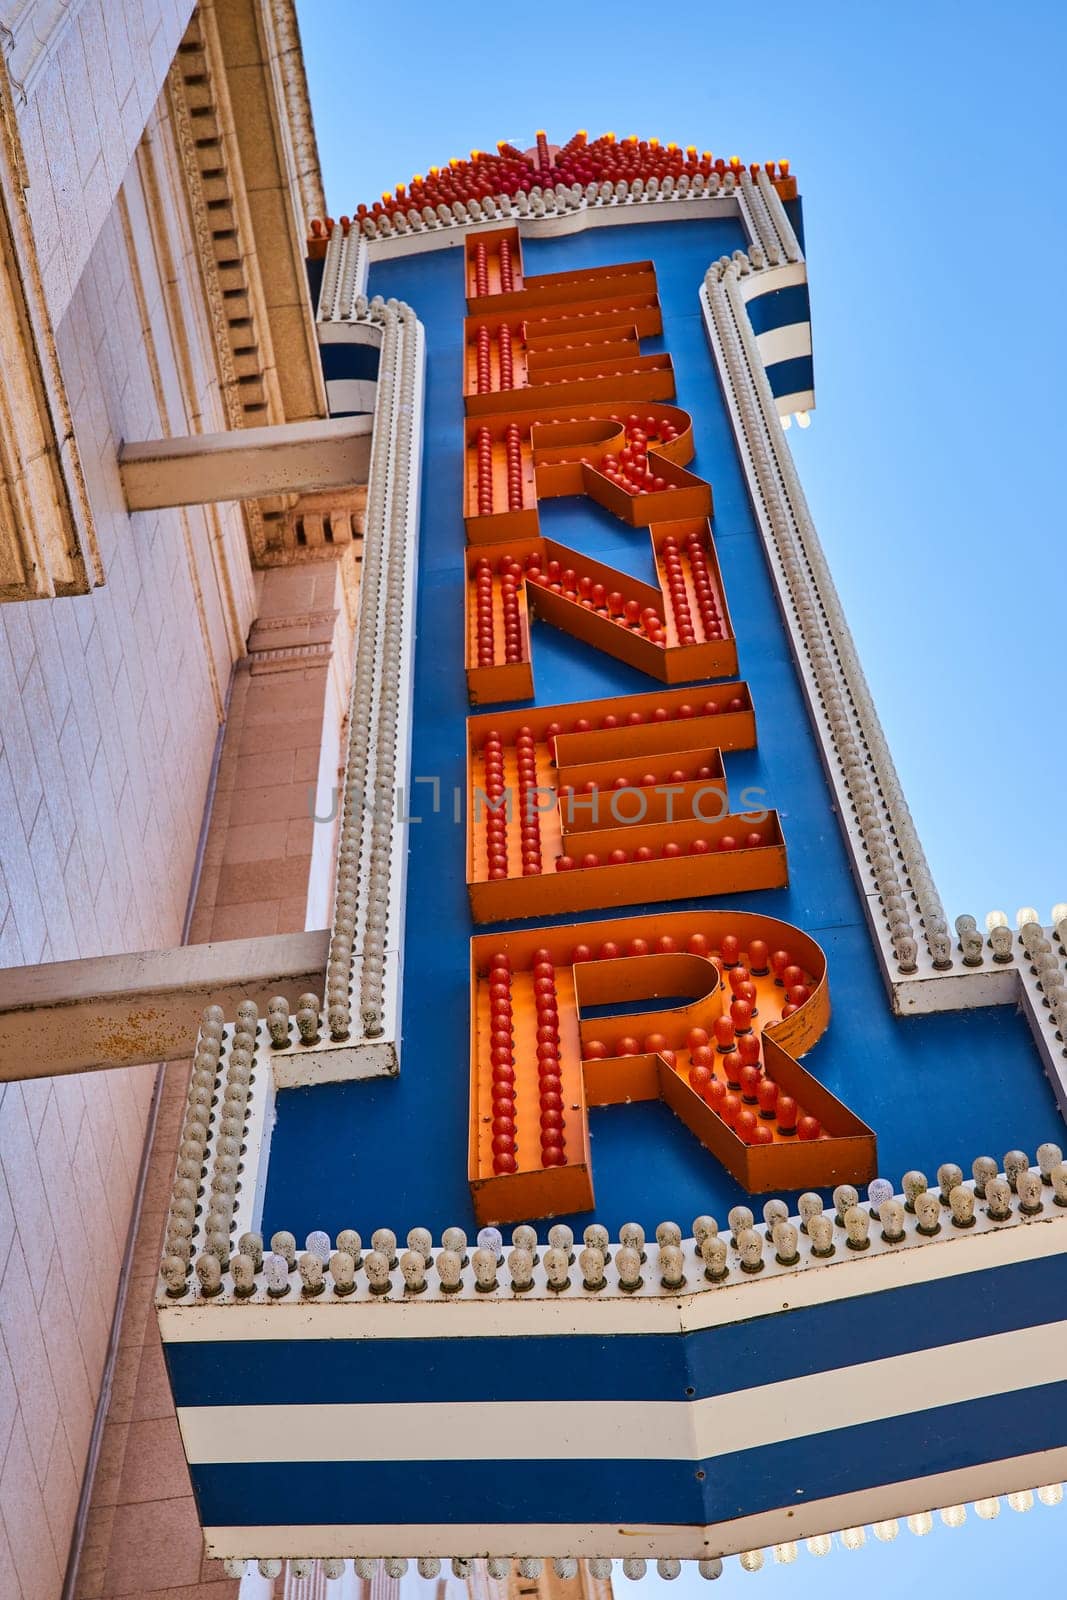 Retro Theater Marquee Sign with Bulbs, Blue Sky Upward View by njproductions